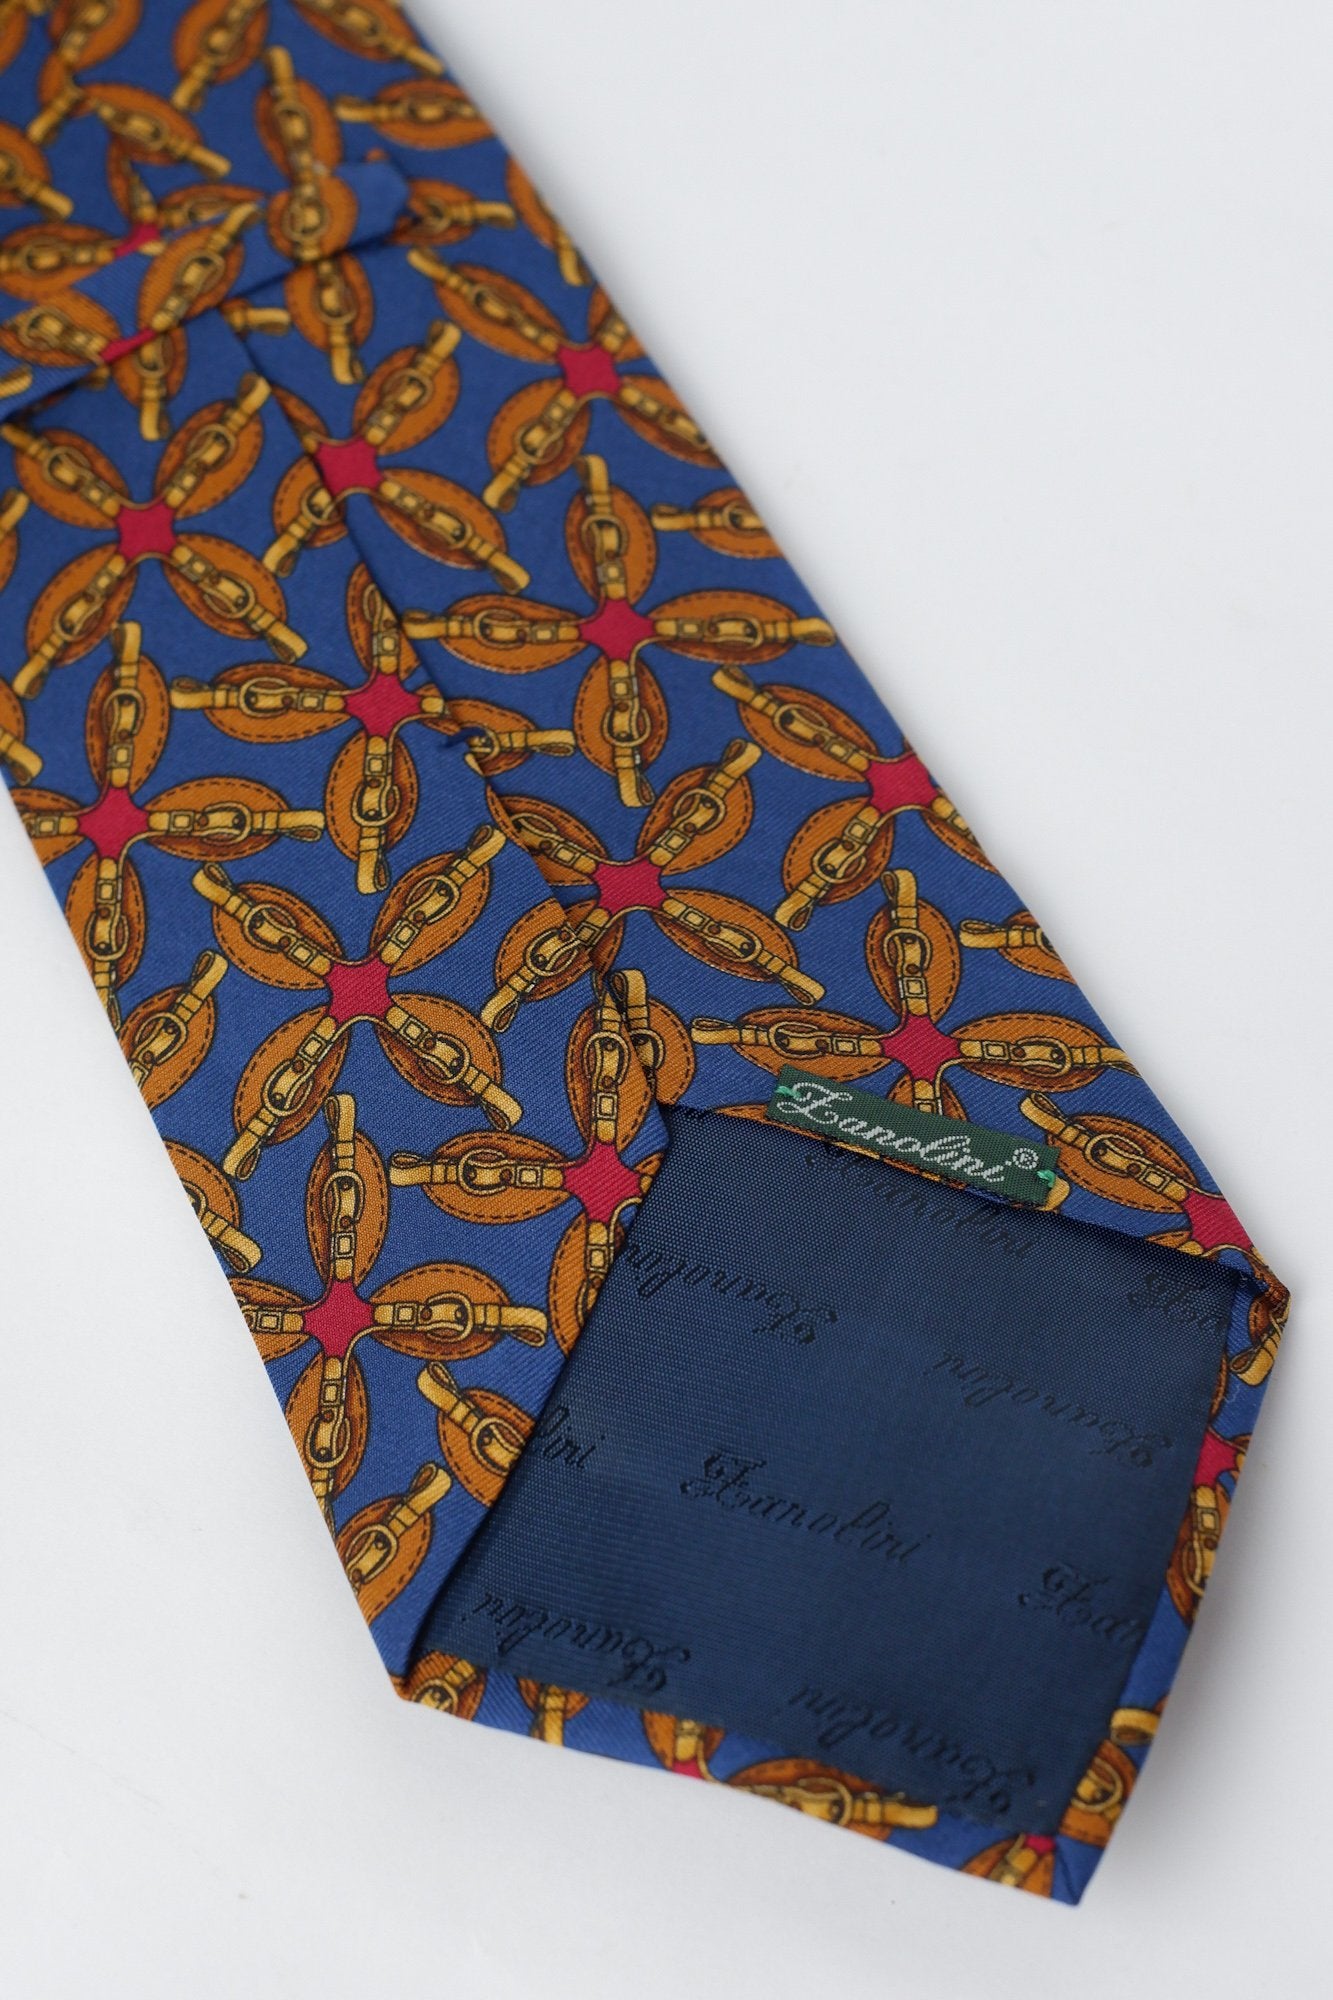 Lanolini Blue with Gold Chain Printed Necktie